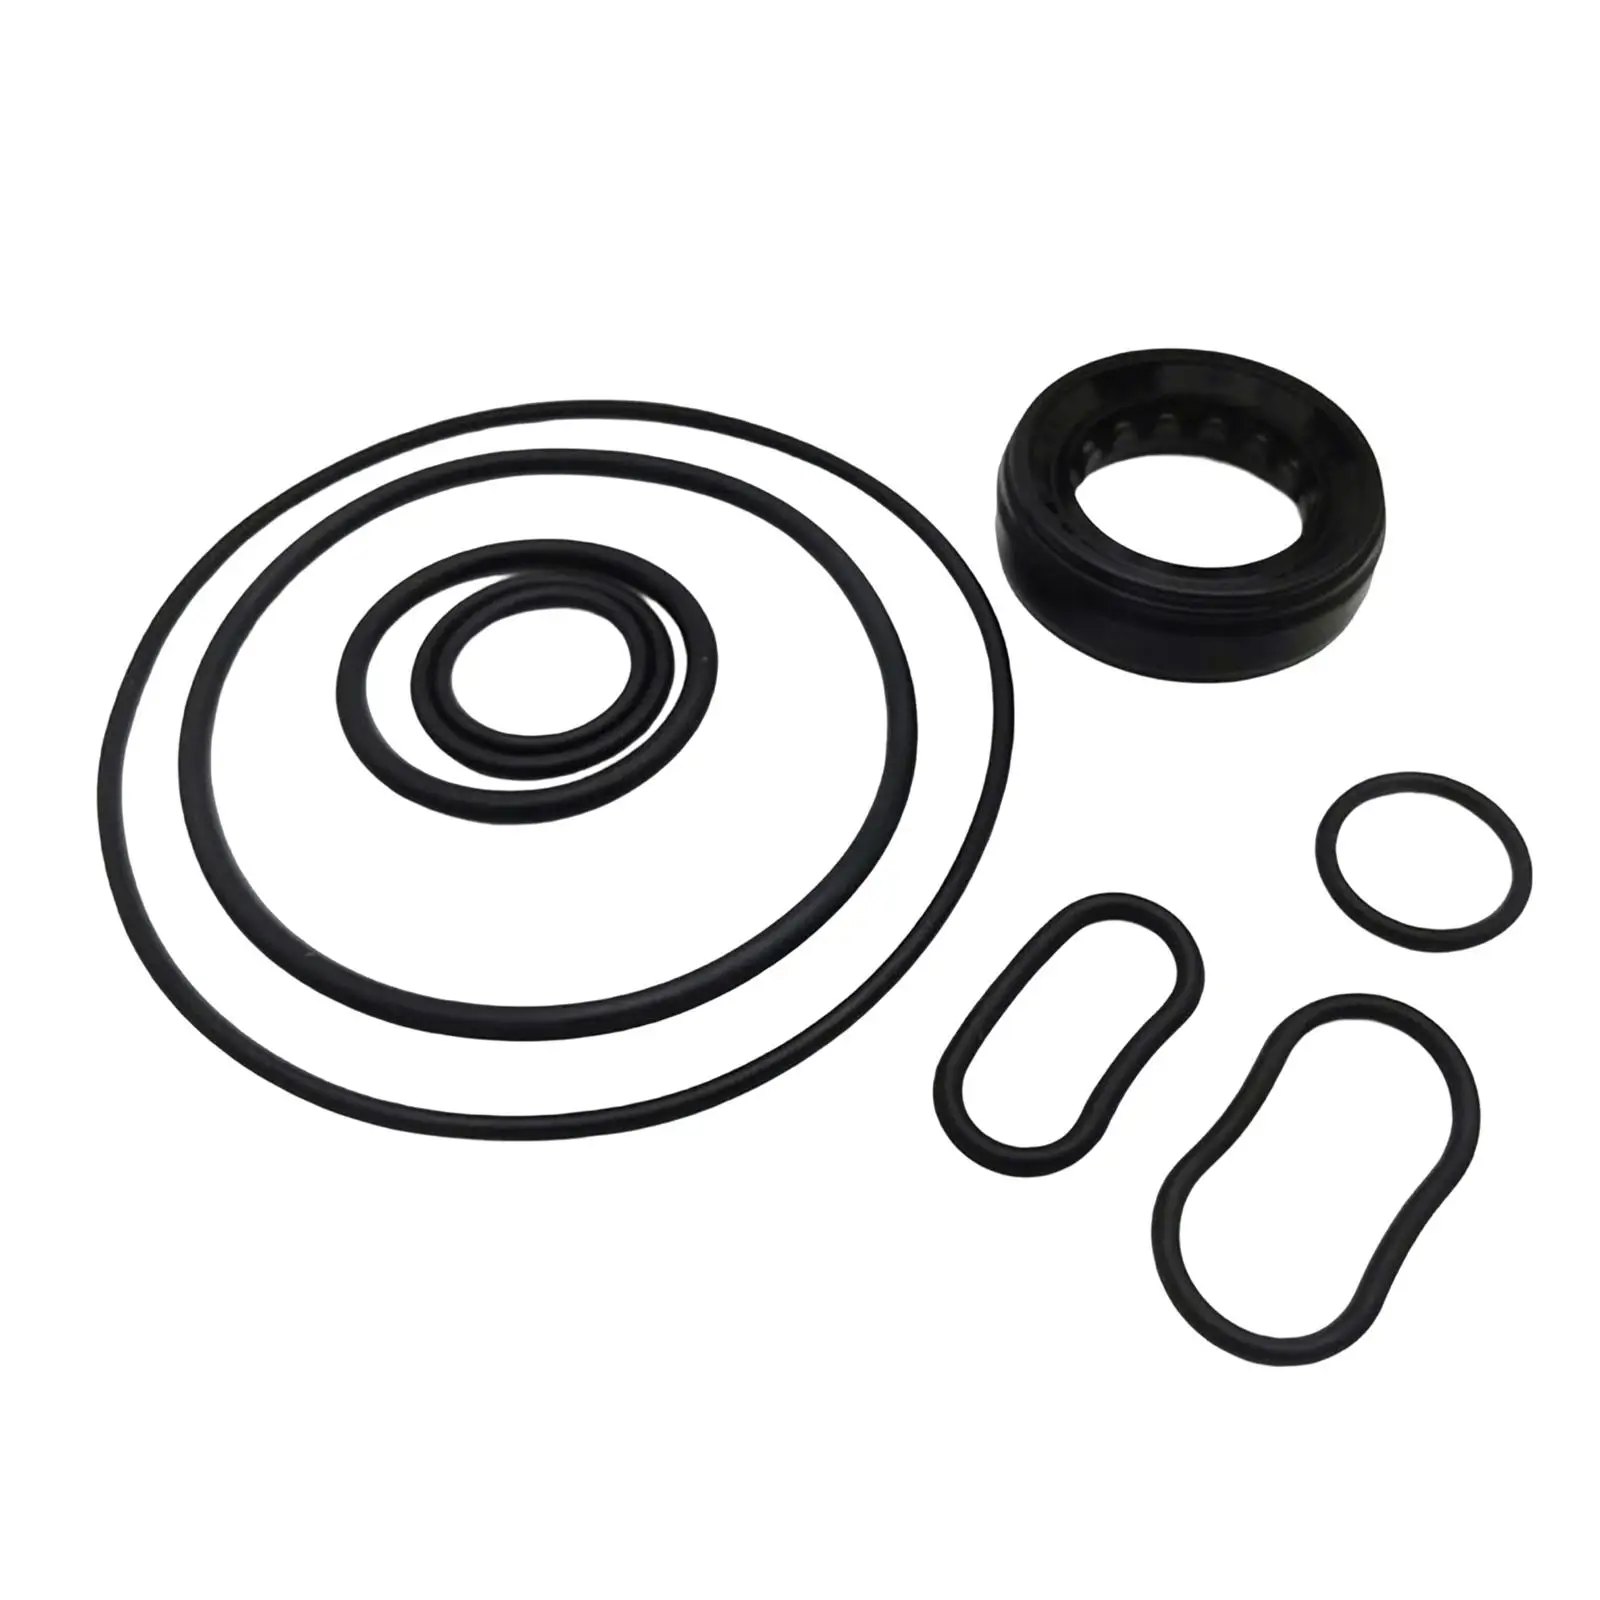 Power Steering Pump Seal Kit, 06539-Pnc-003 ,Auto Accessories ,Direct Replacement with O Rings